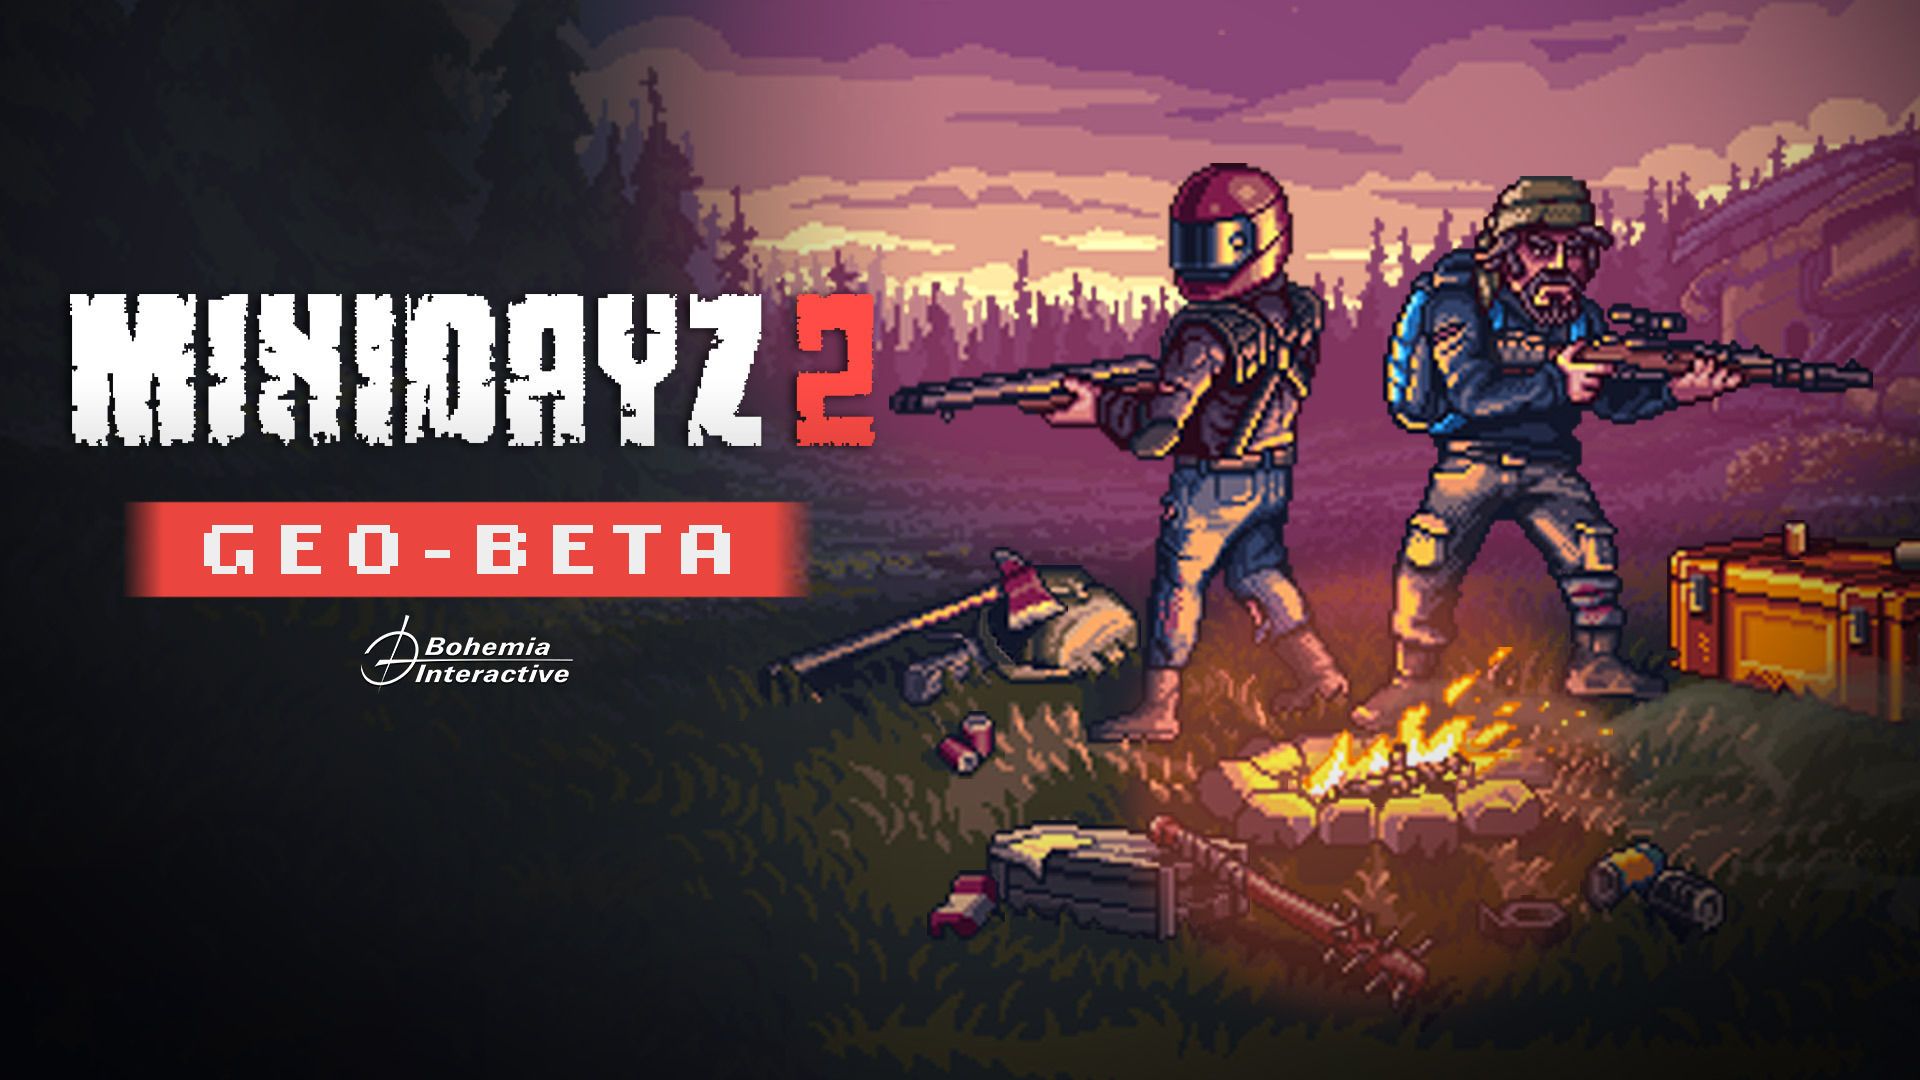 Mini DAYZ has launched on mobile devices!, Blog